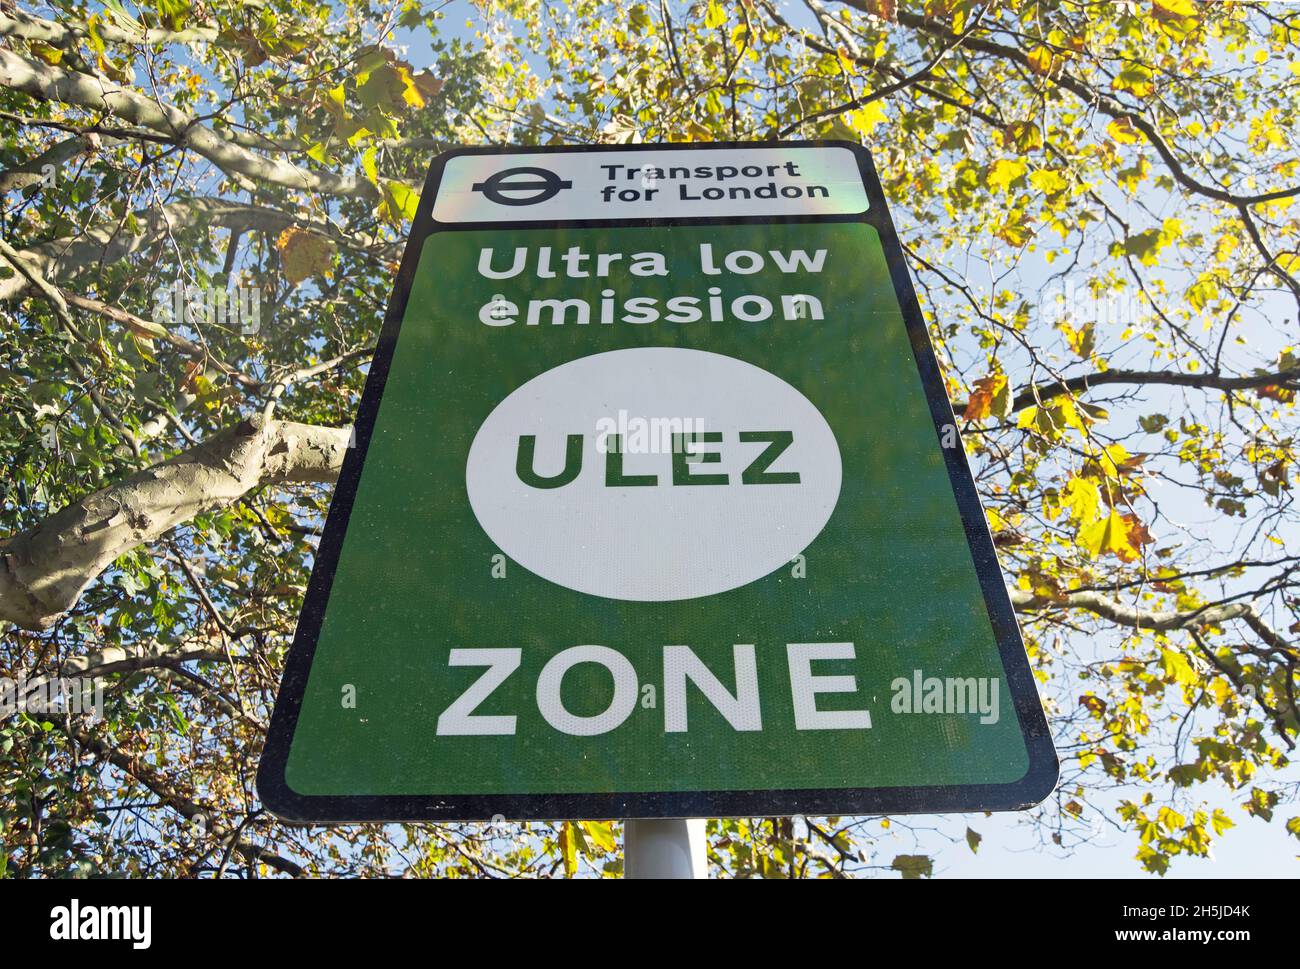 transport for london sign marking the start of an ultra low emissions zone, or ulez, at chalkers corner, southwest london, england Stock Photo